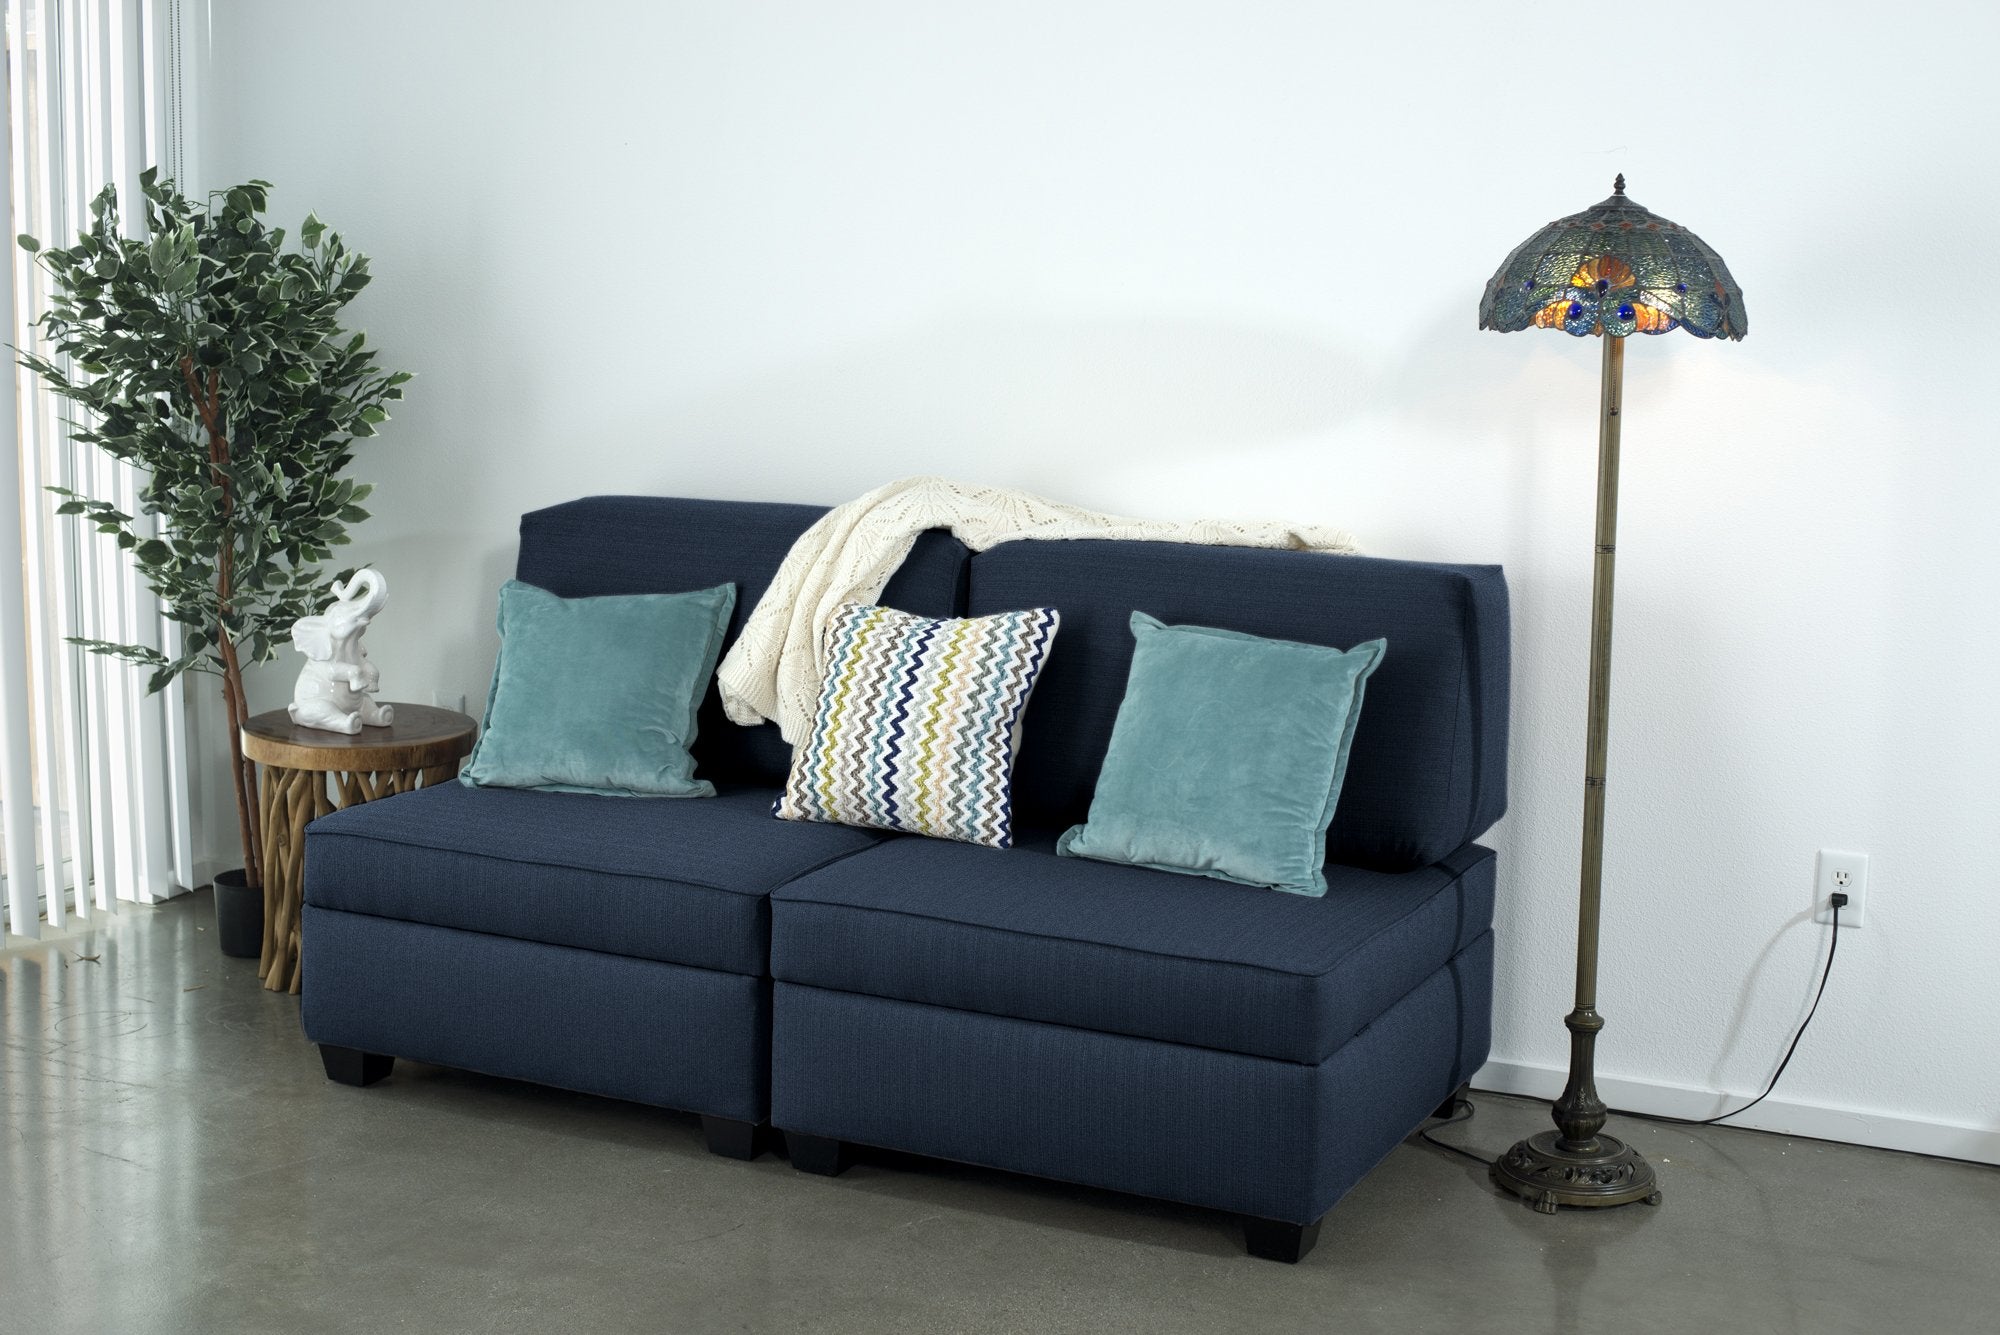 Convertible Sofa Bed With Storage